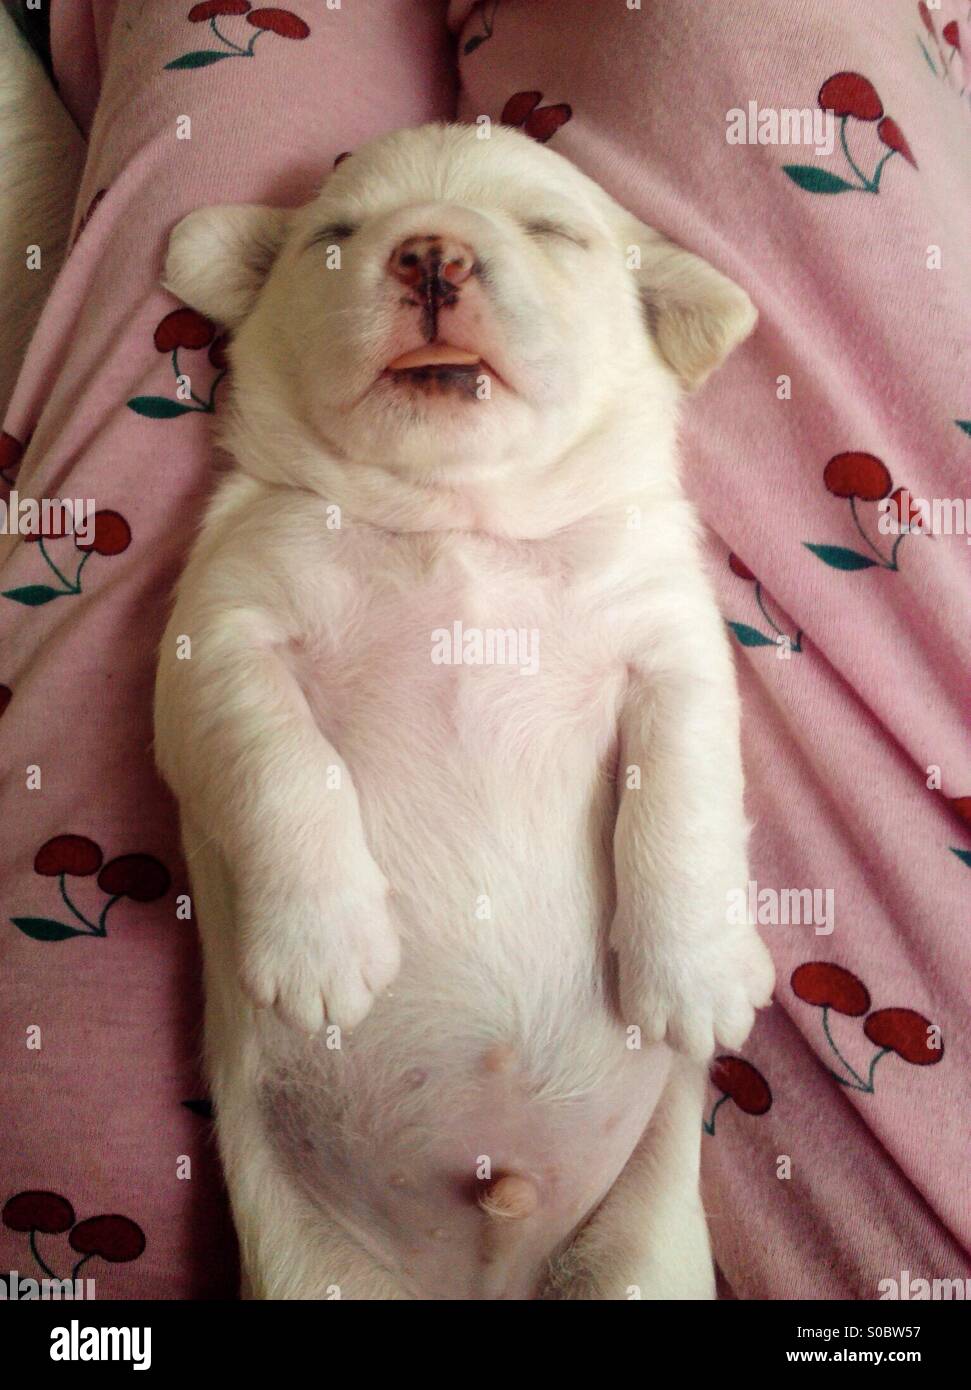 Puppy sleeping on it's back with it's tongue out Stock Photo